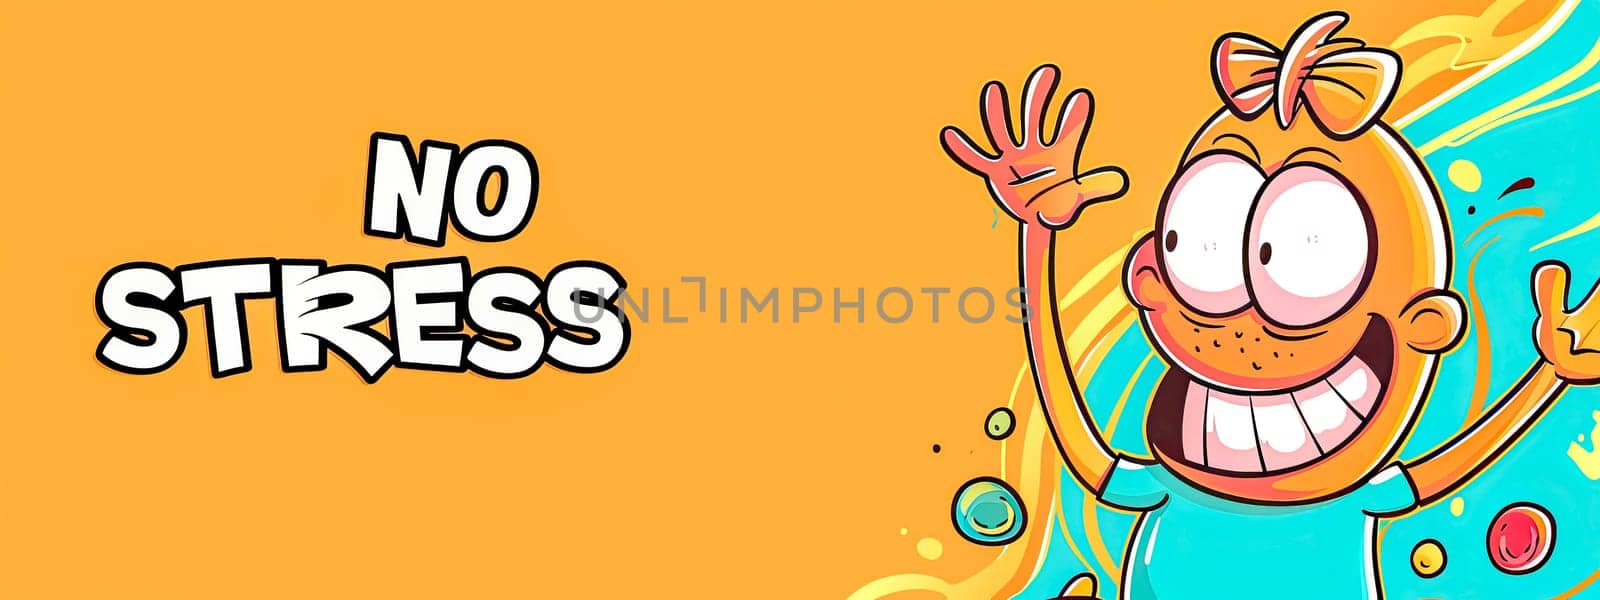 Vibrant cartoon illustration of a jovial character waving, emblazoned with no stress message